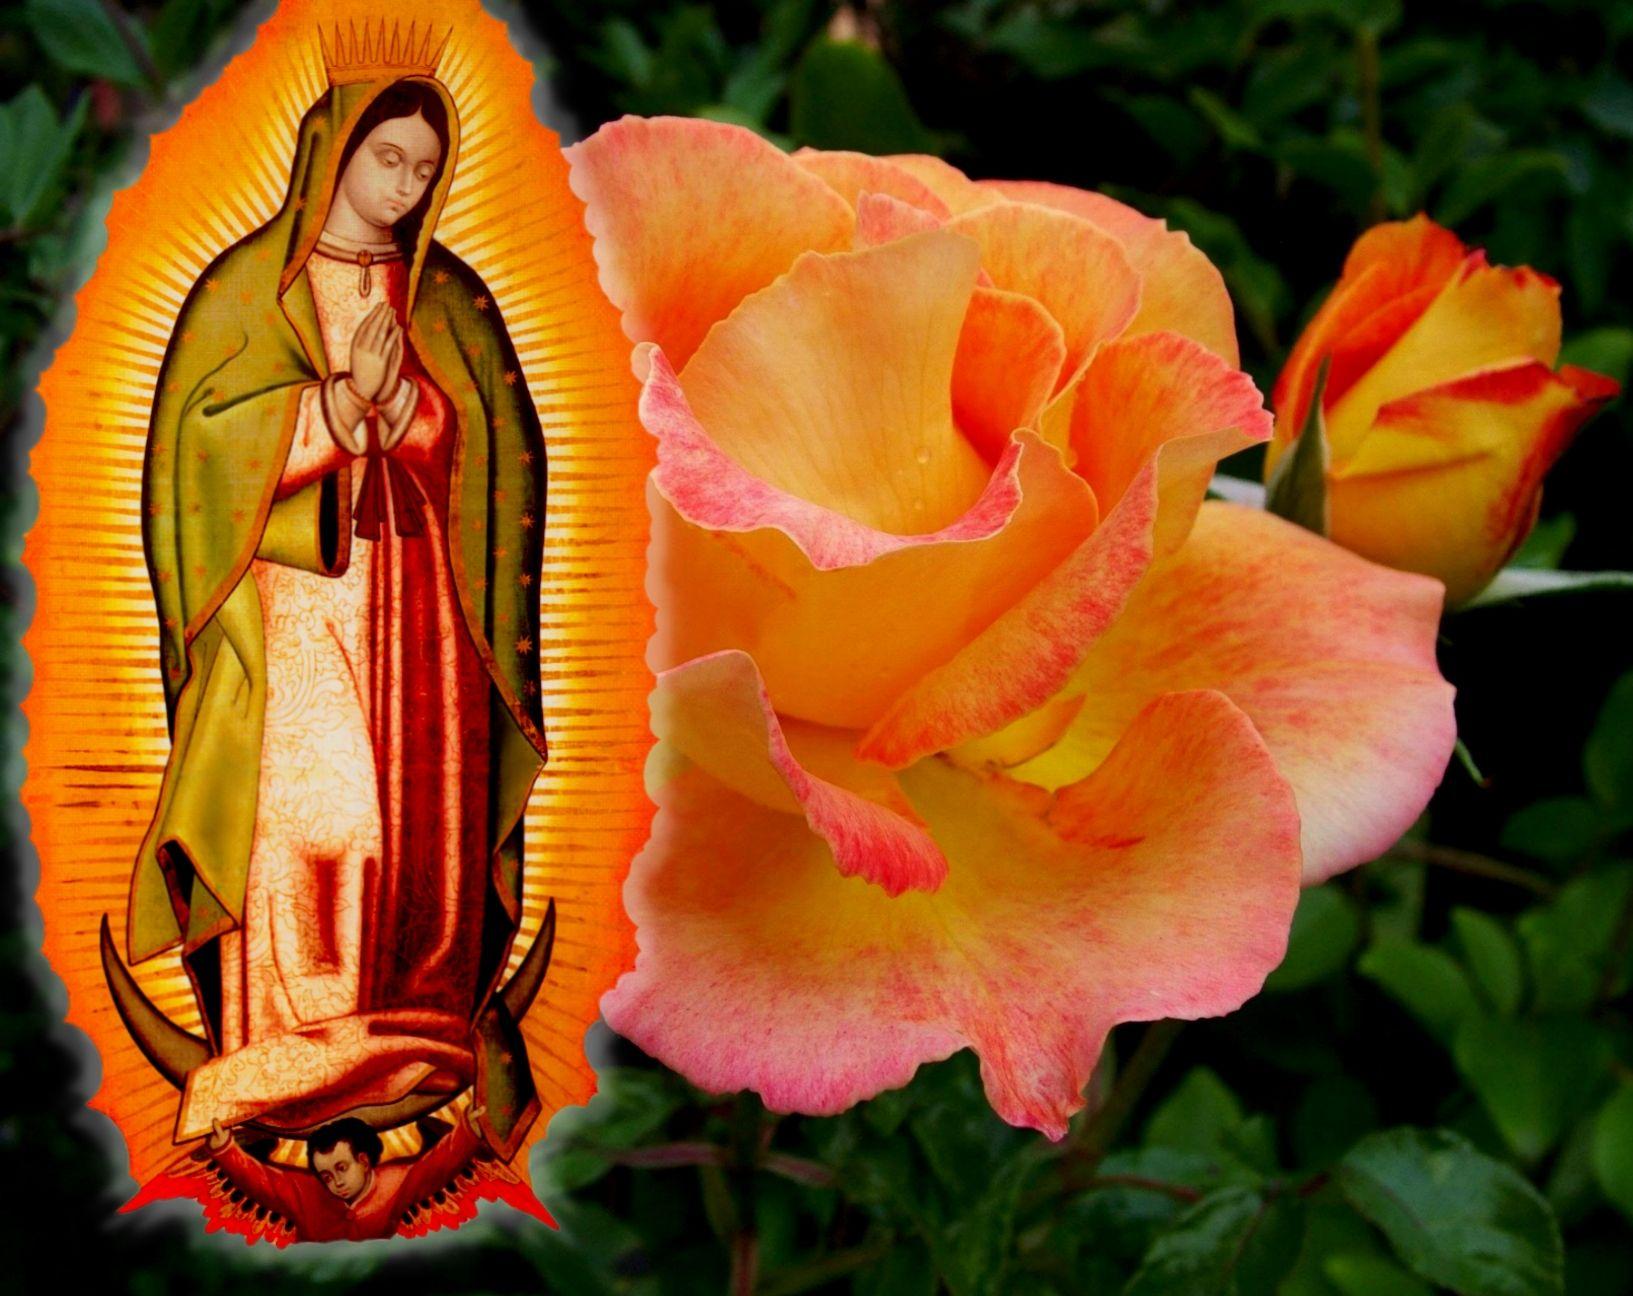 FEAST OF OUR LADY OF GUADALUPE WITH LITTLE GALLERY